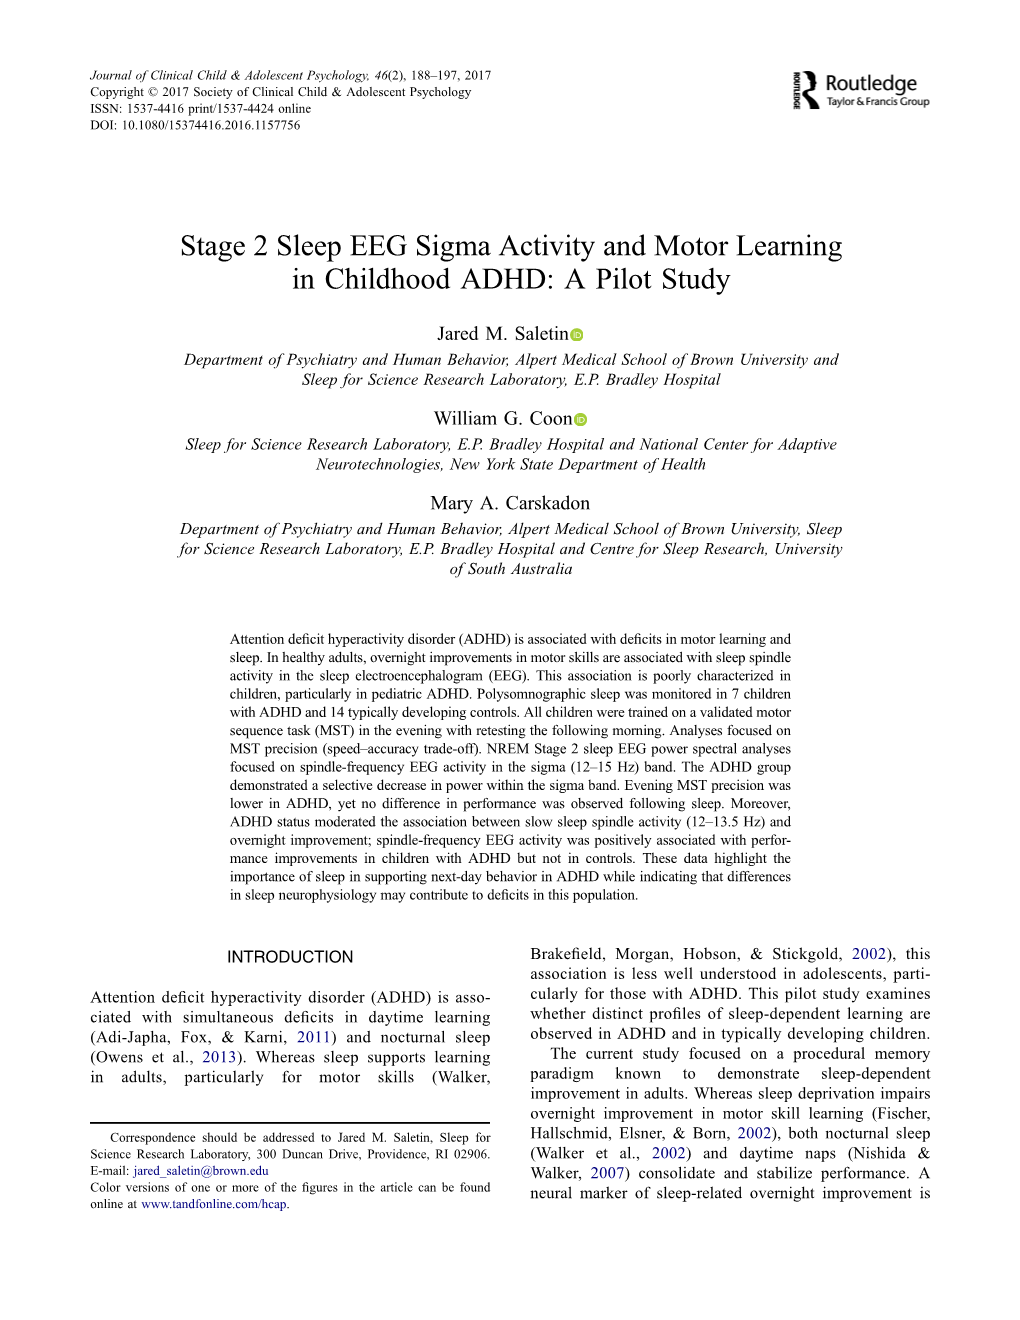 Stage 2 Sleep EEG Sigma Activity and Motor Learning in Childhood ADHD: a Pilot Study